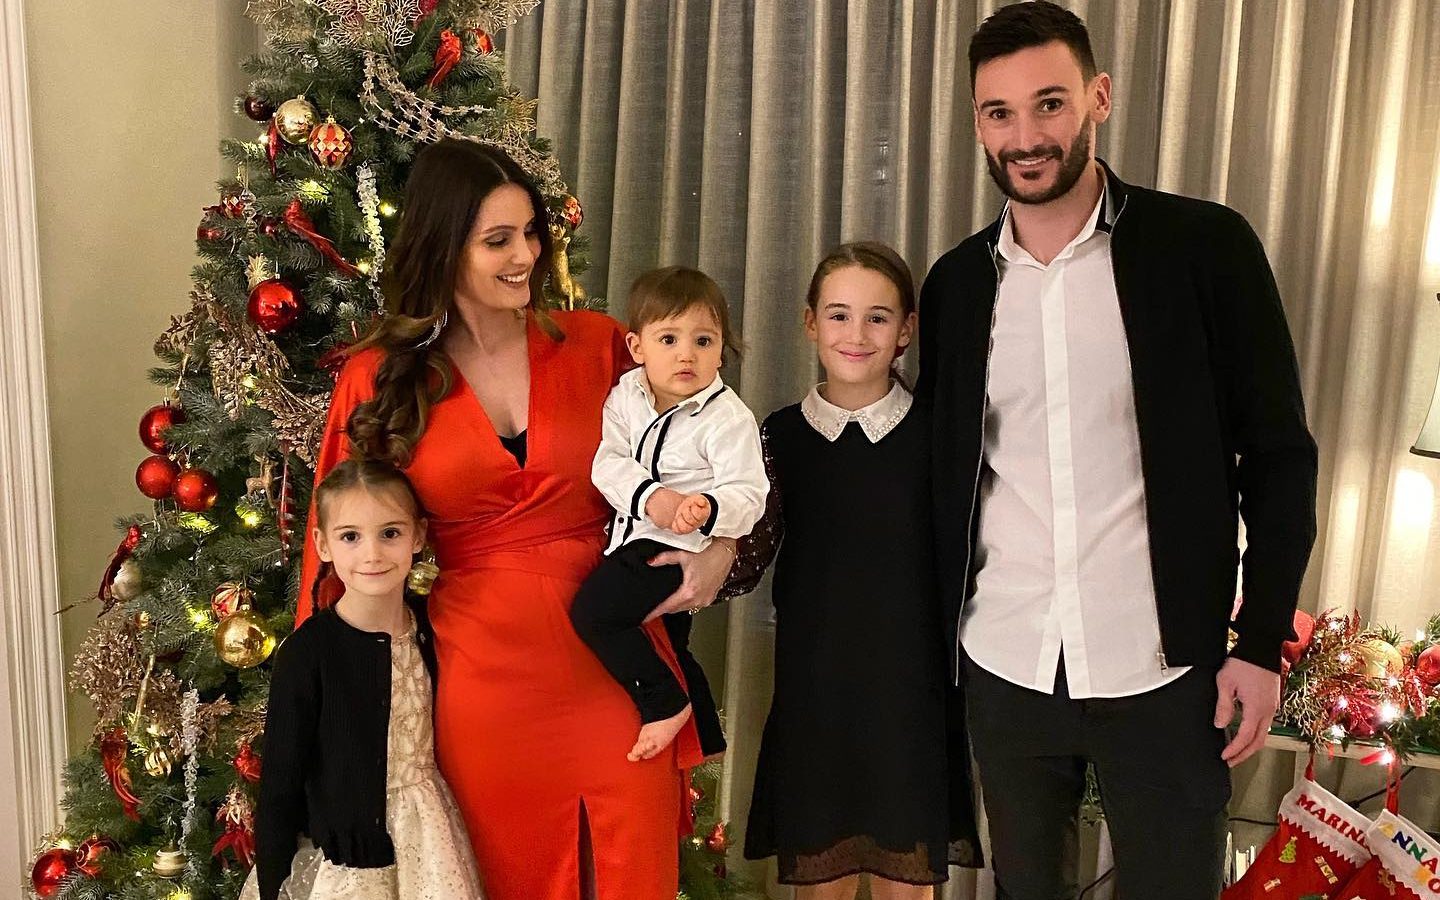 Hugo Lloris with his wife and children. (Credit: Instagram)